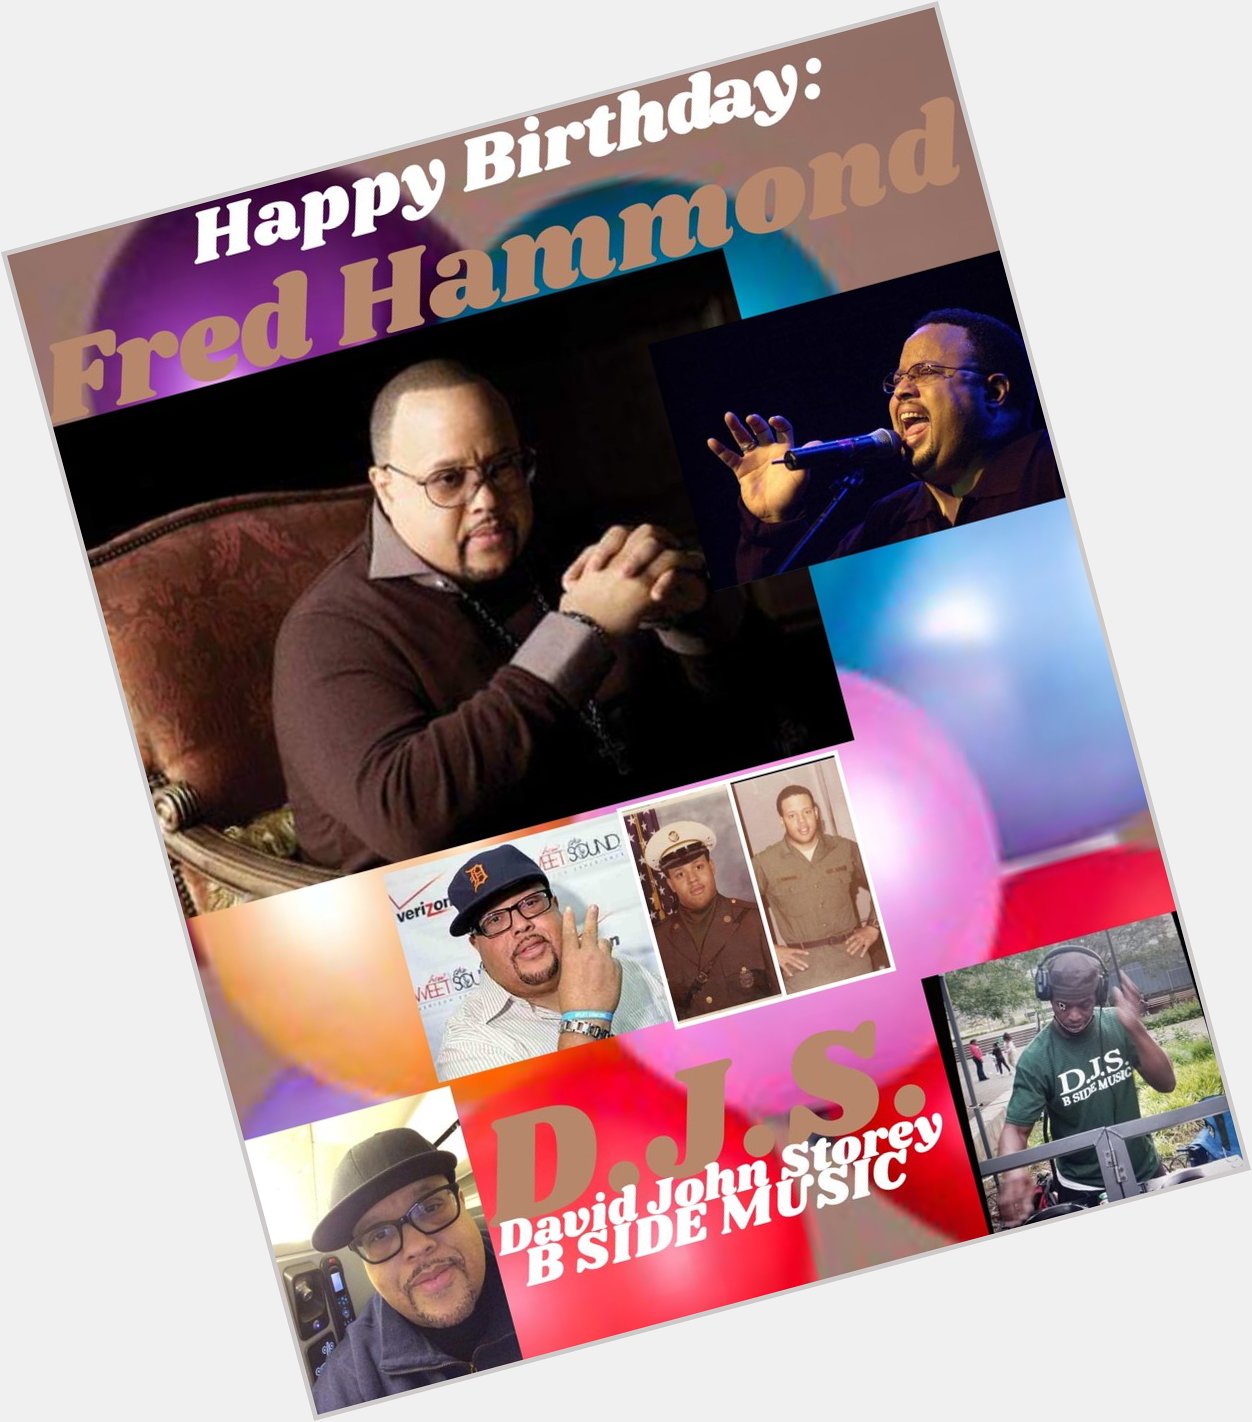 I(D.J.S.)\"B SIDE\" taking time to say Happy Birthday to Gospel Singer: \"FRED HAMMOND\"!!!! 